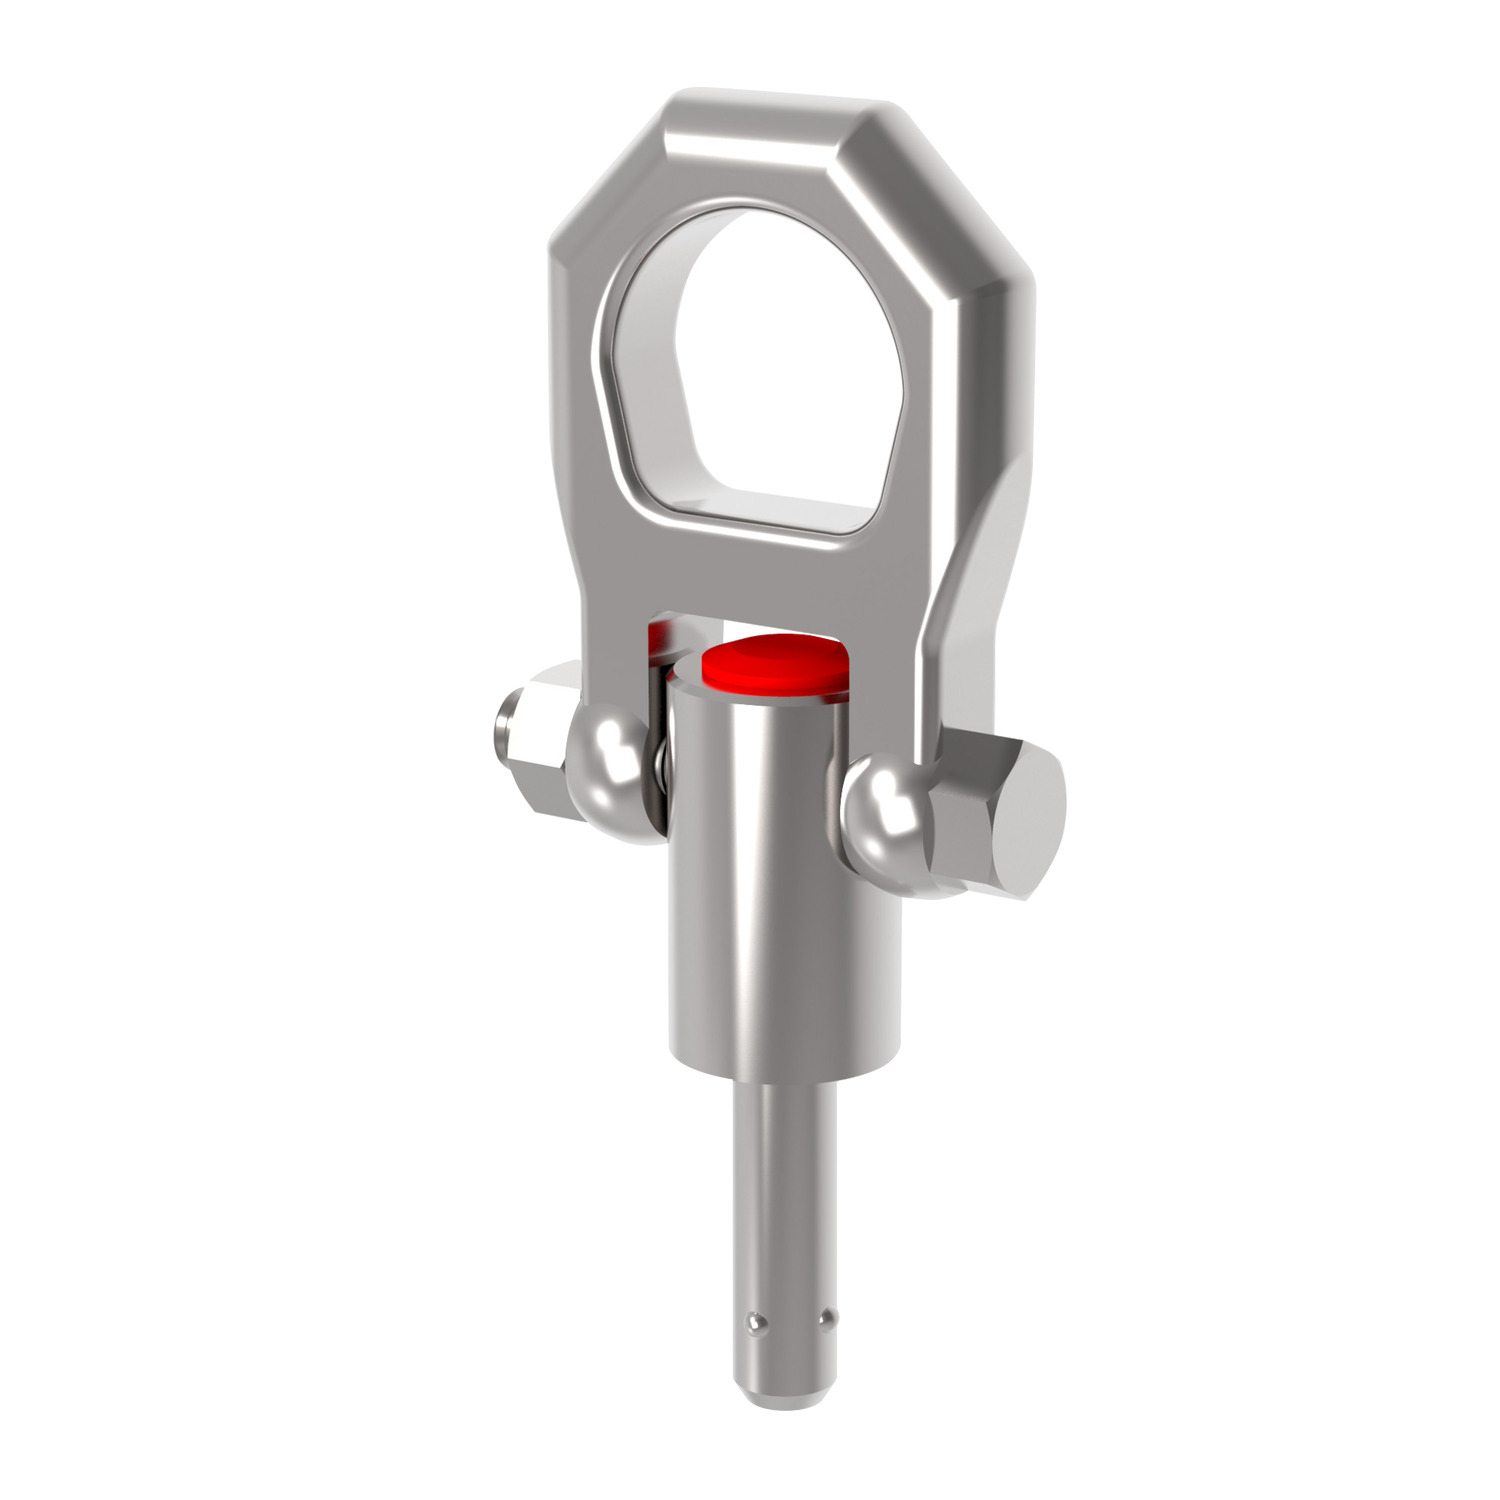 Quick Lift Pins - Self Locking Stainless steel safety shackle design for preventing accidental locking or unlocking. Adjustable for lifting components at 45°, 90° or 180°.